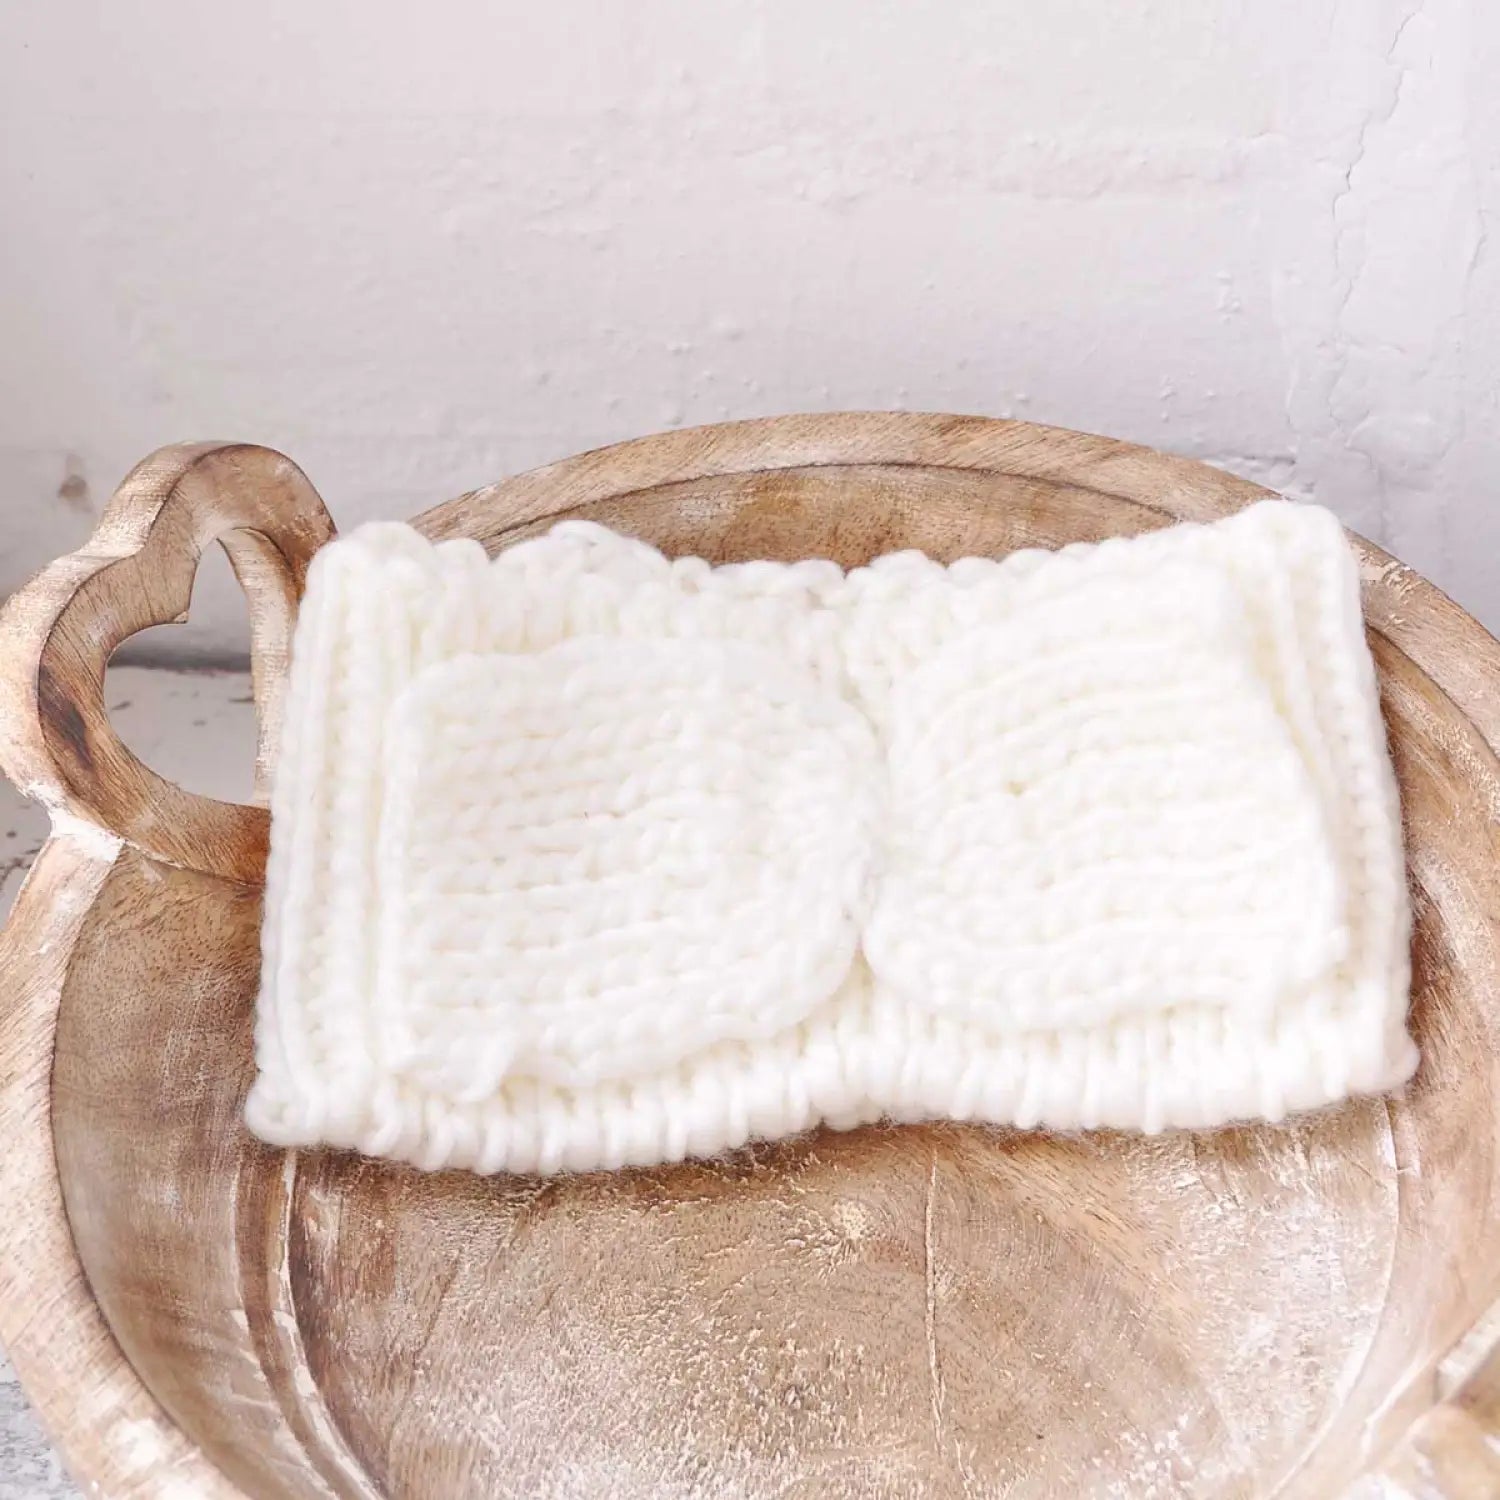 Stylish white knit headband with bow detail on wooden bowl